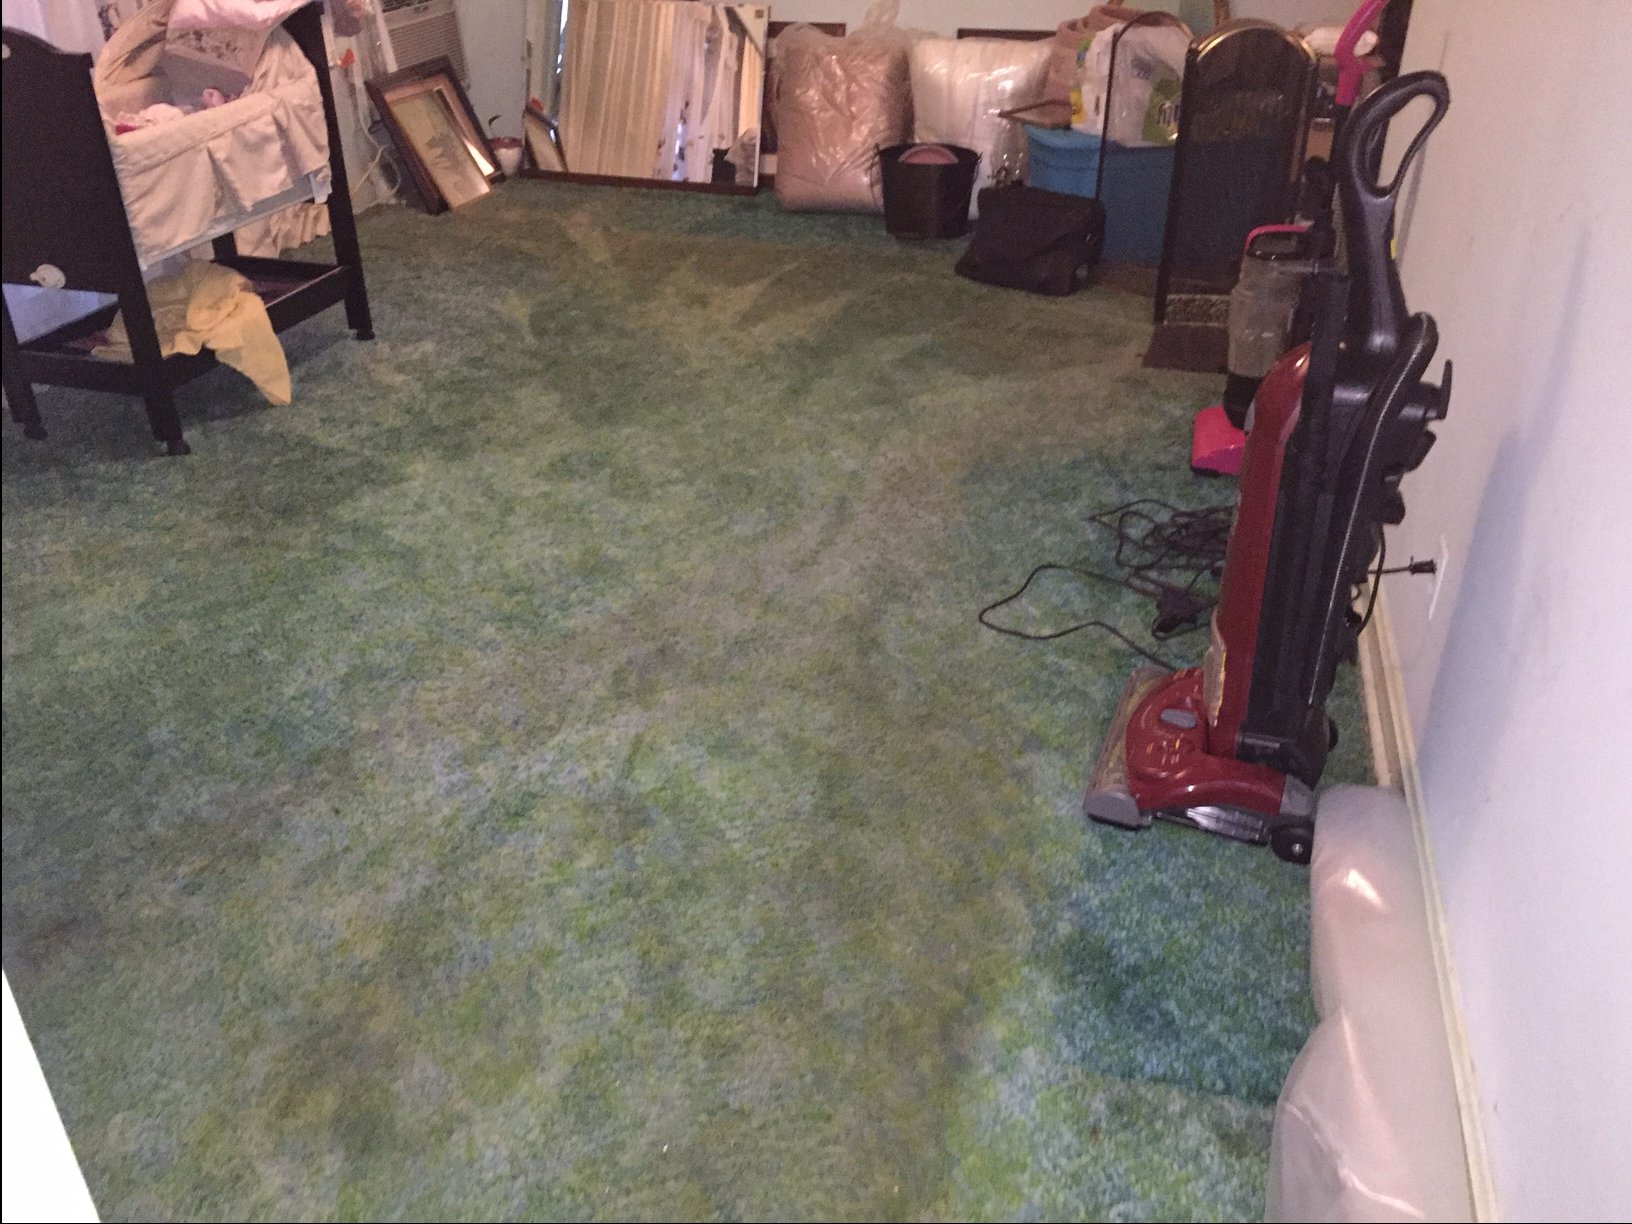 The carpet was 4 inches under water.